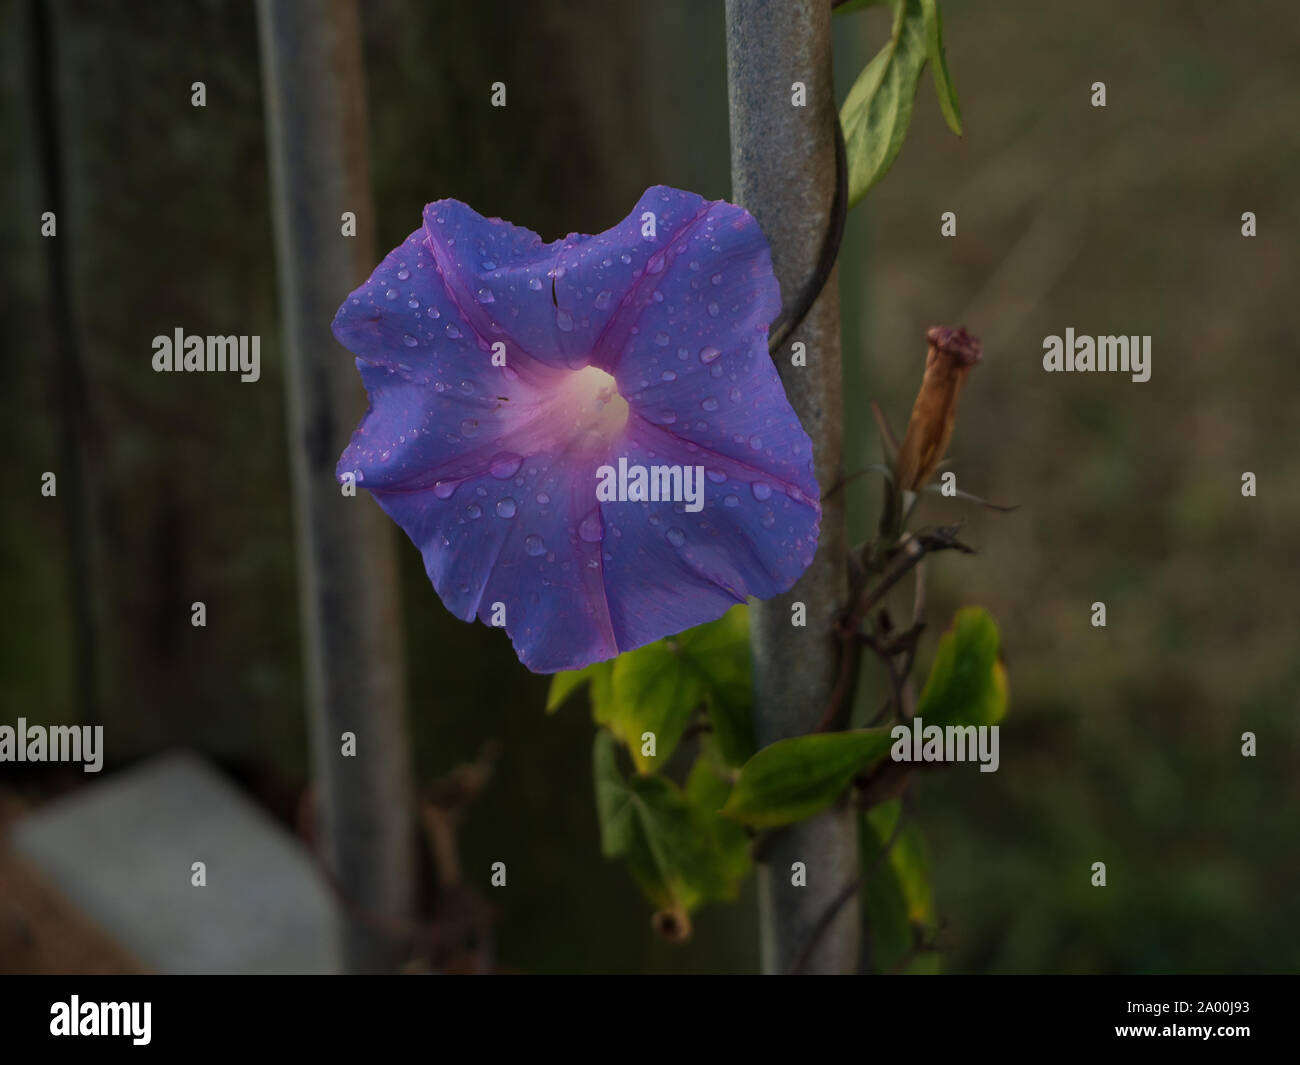 Raindrops freshen a purple morning glory flower vine that is climbing up a fence pole Stock Photo